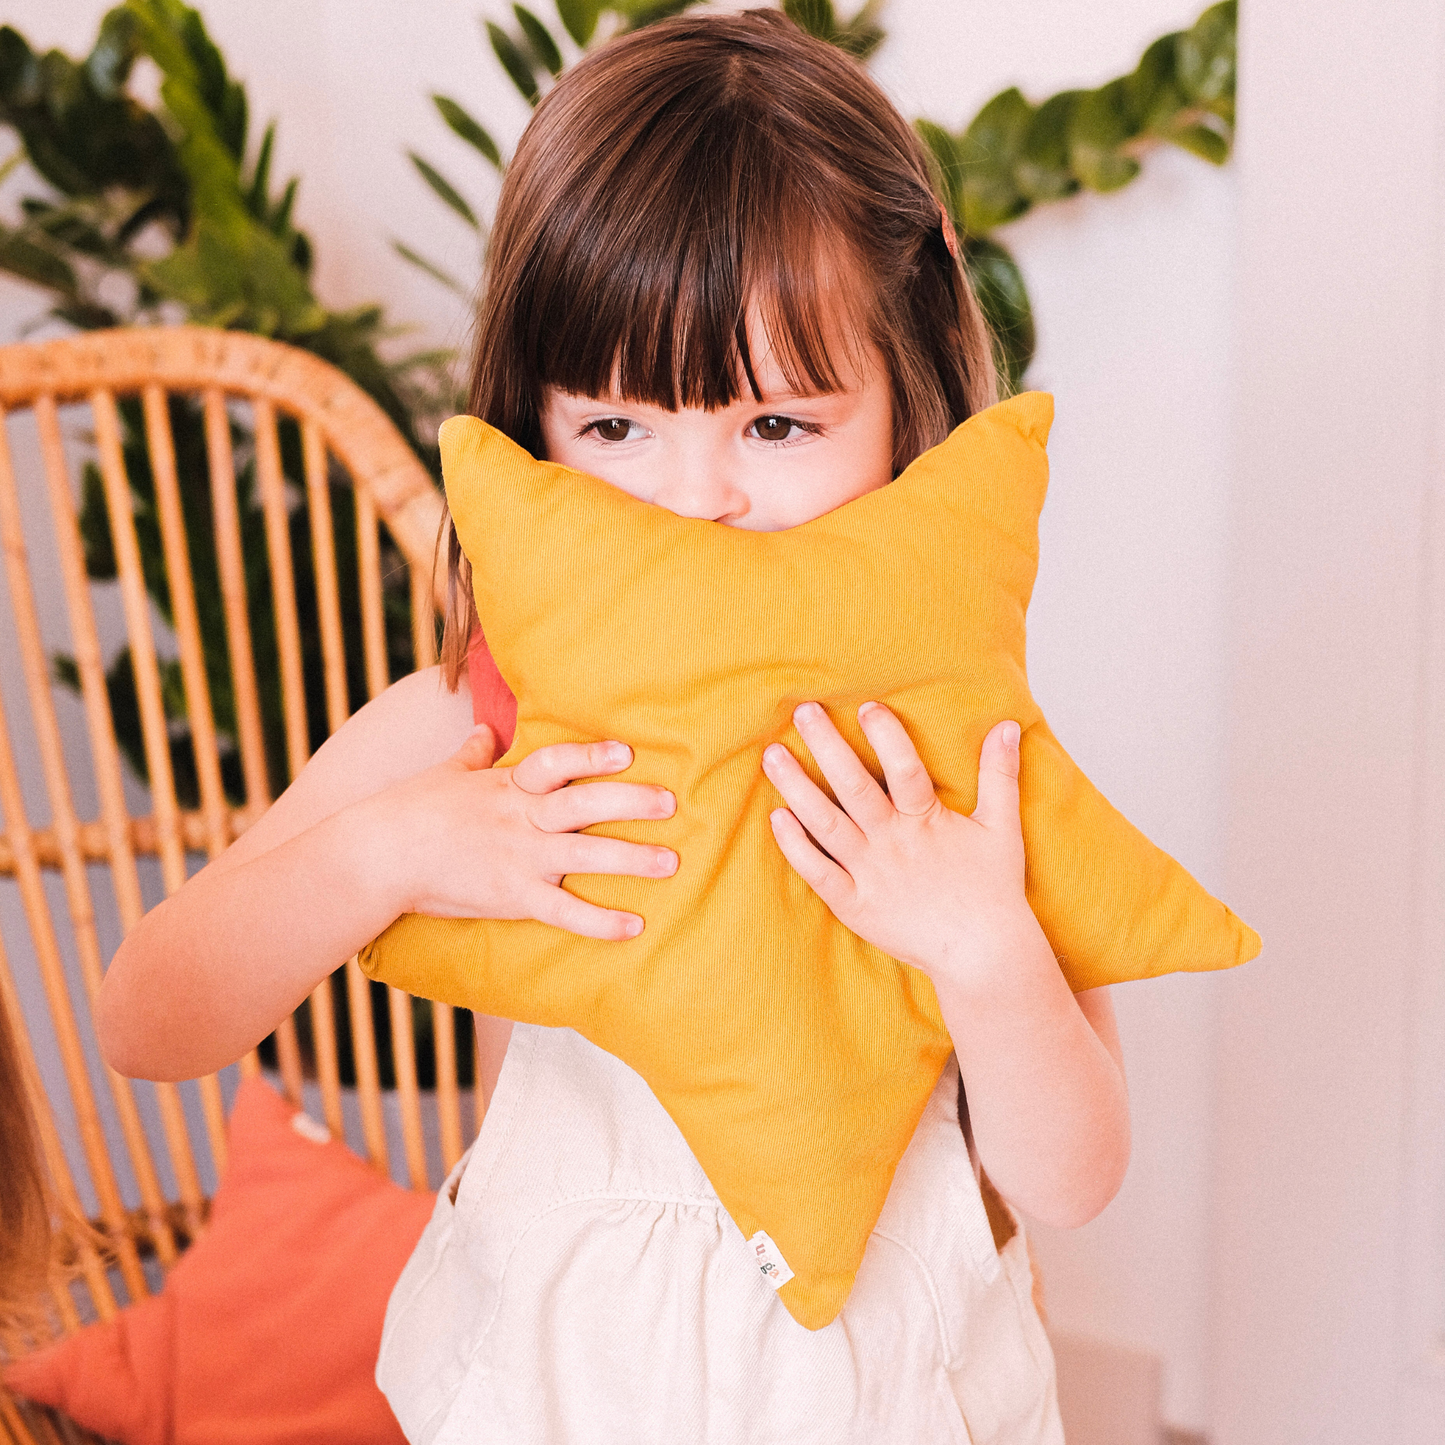 Star Cushion - Hypoallergenic polyester filling